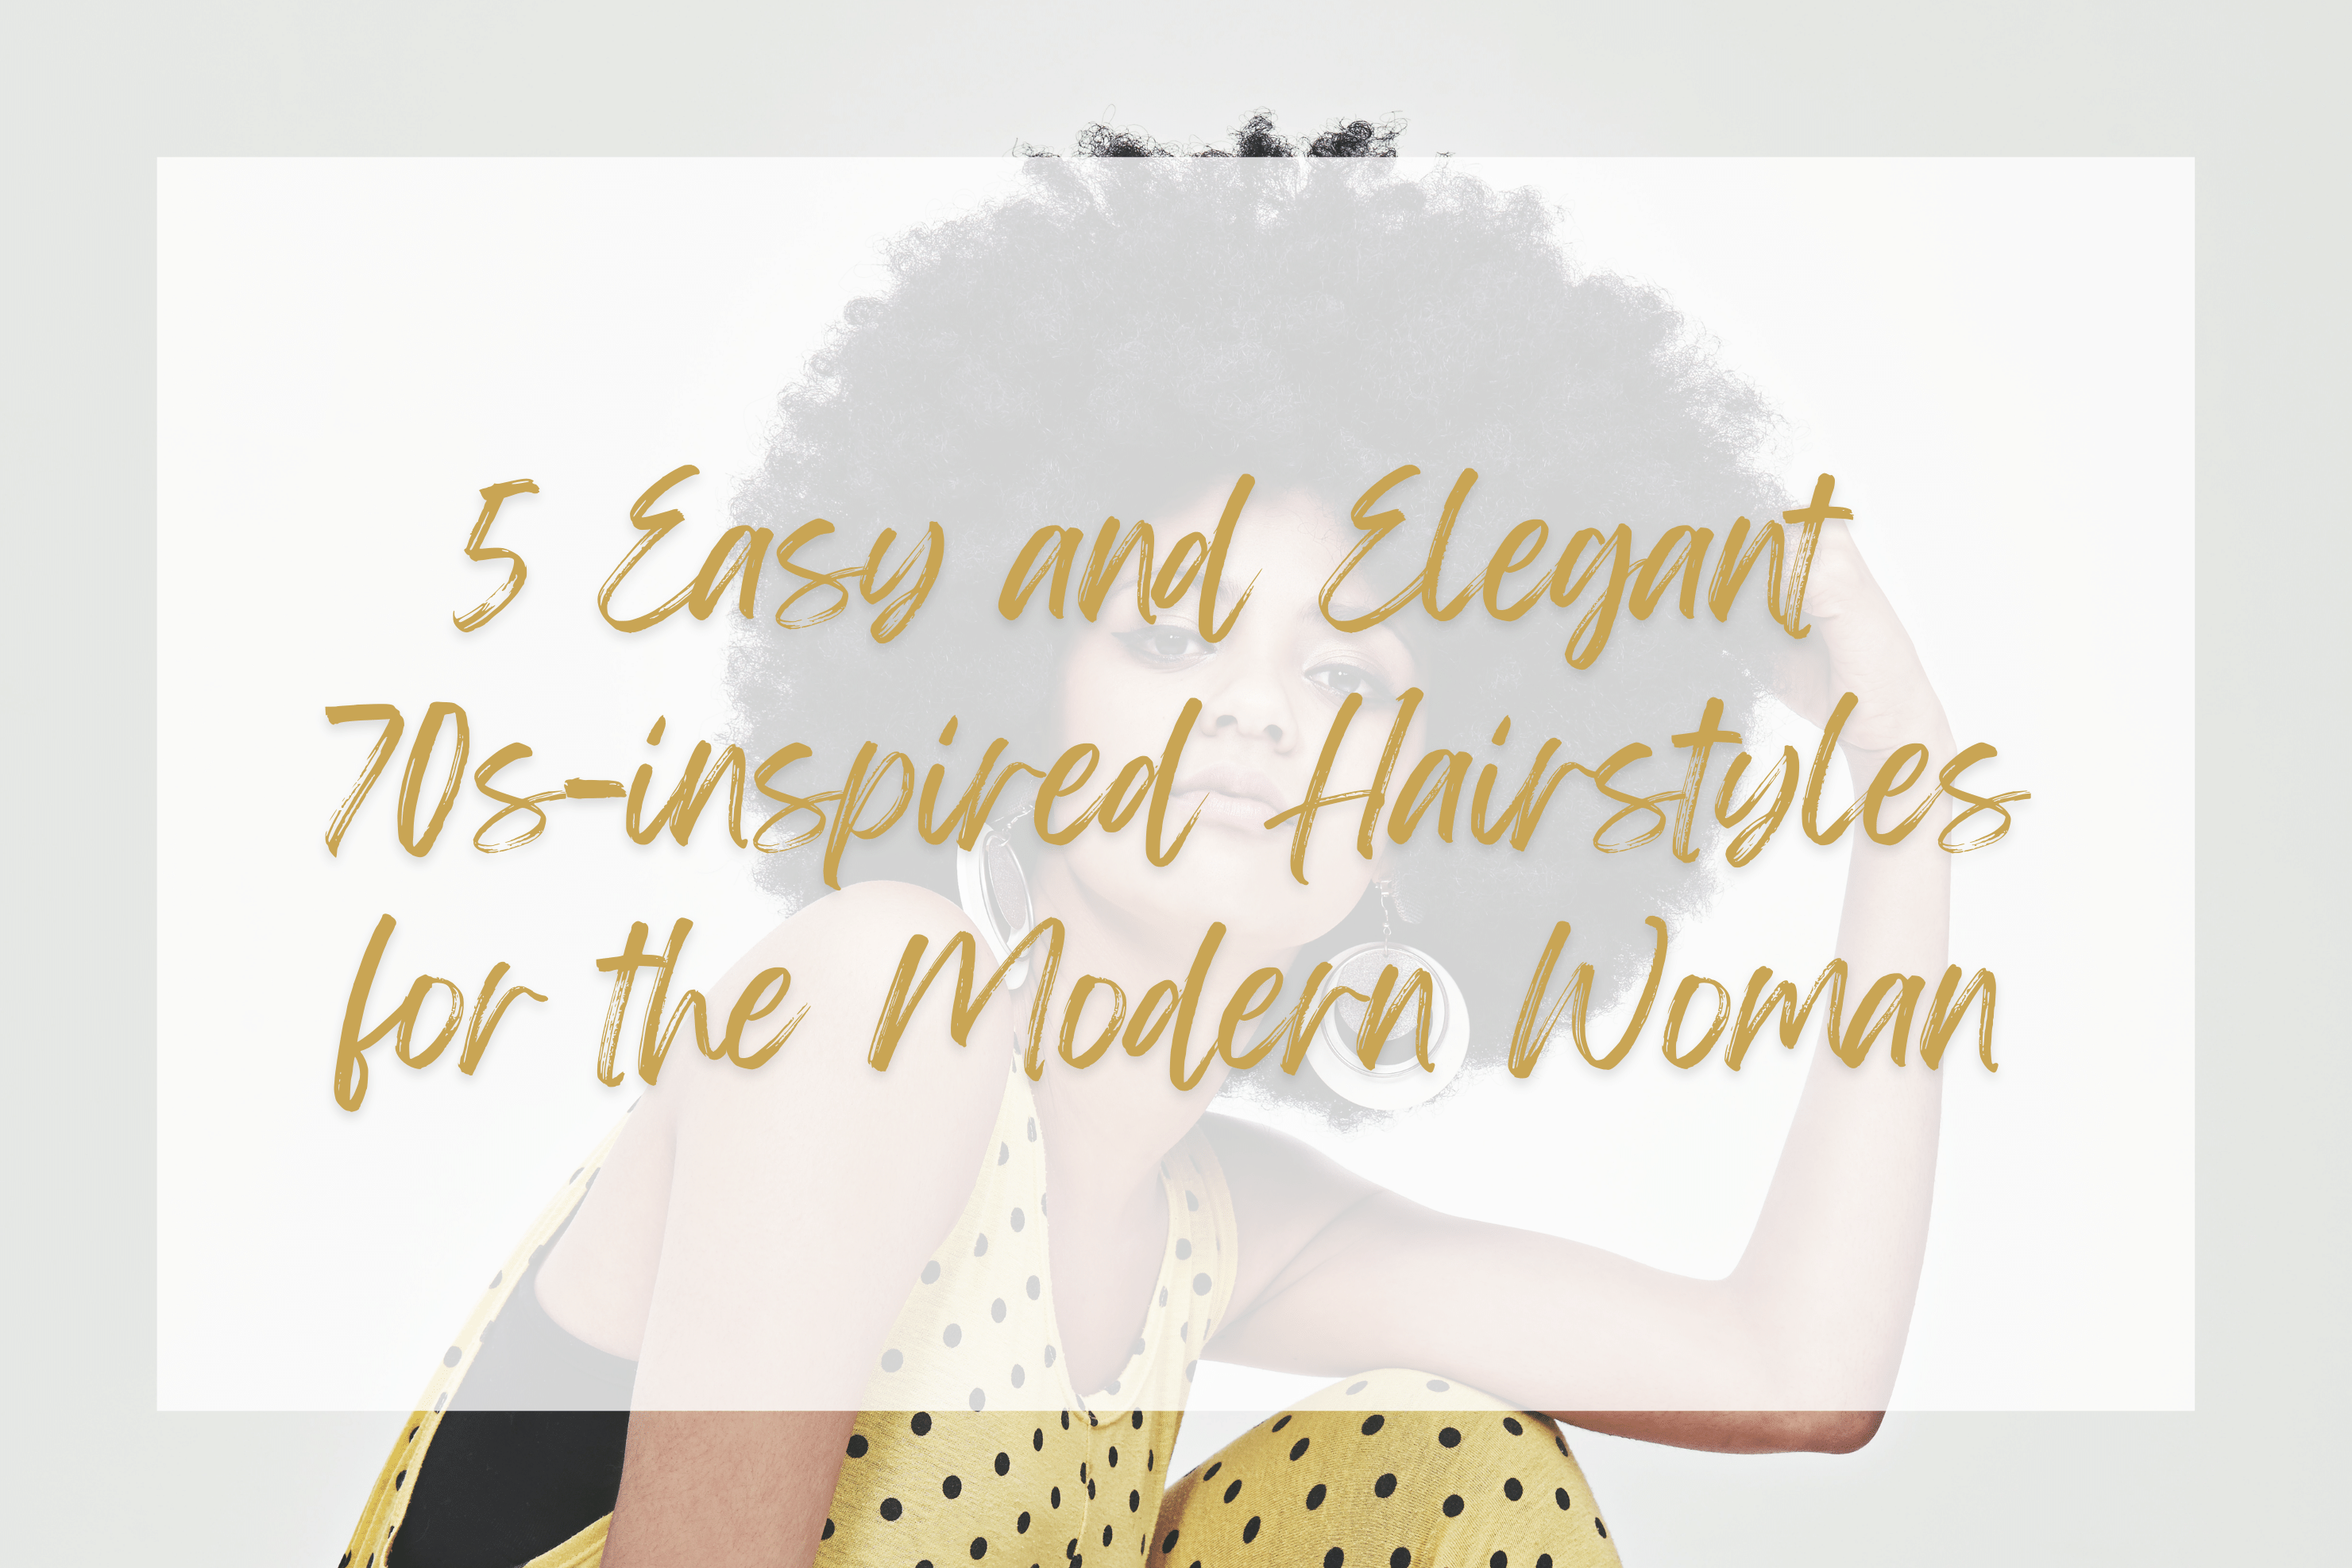 5 Easy and Elegant 70s-inspired Hairstyles for the Modern Woman